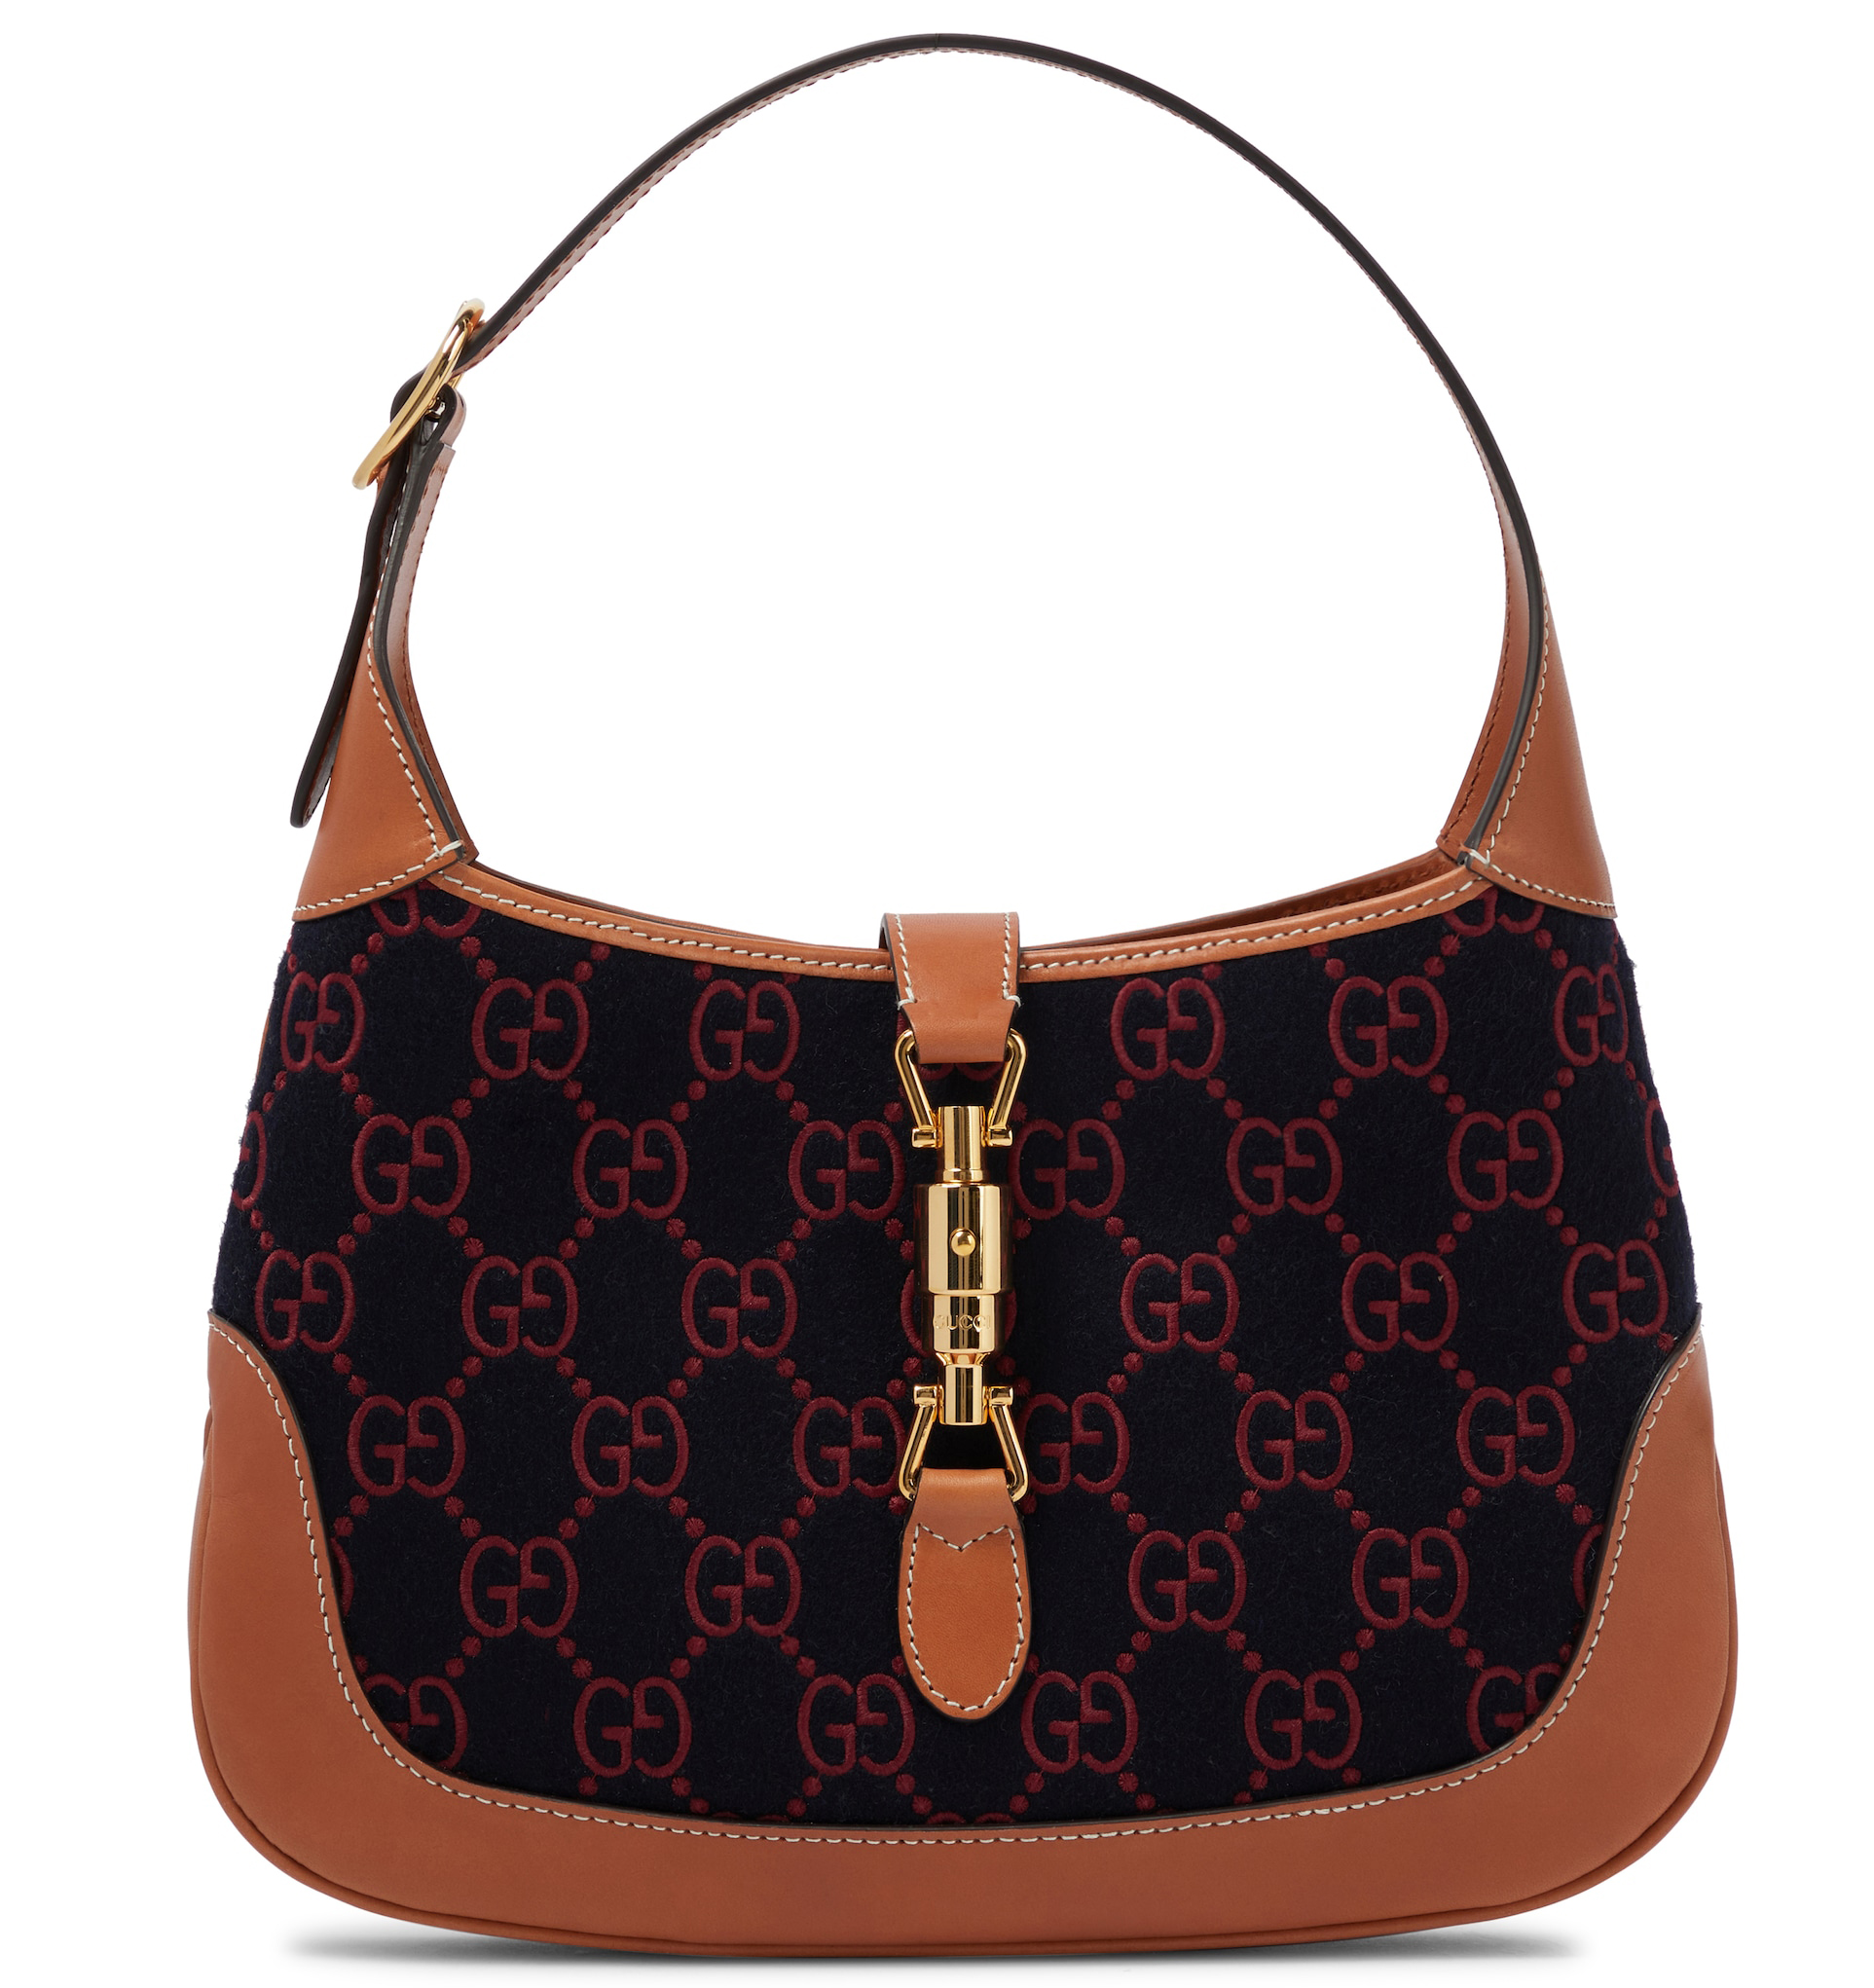 A symbol of Gucci's heritage, Jackie 1961 references the original style created and first worn during the '60s